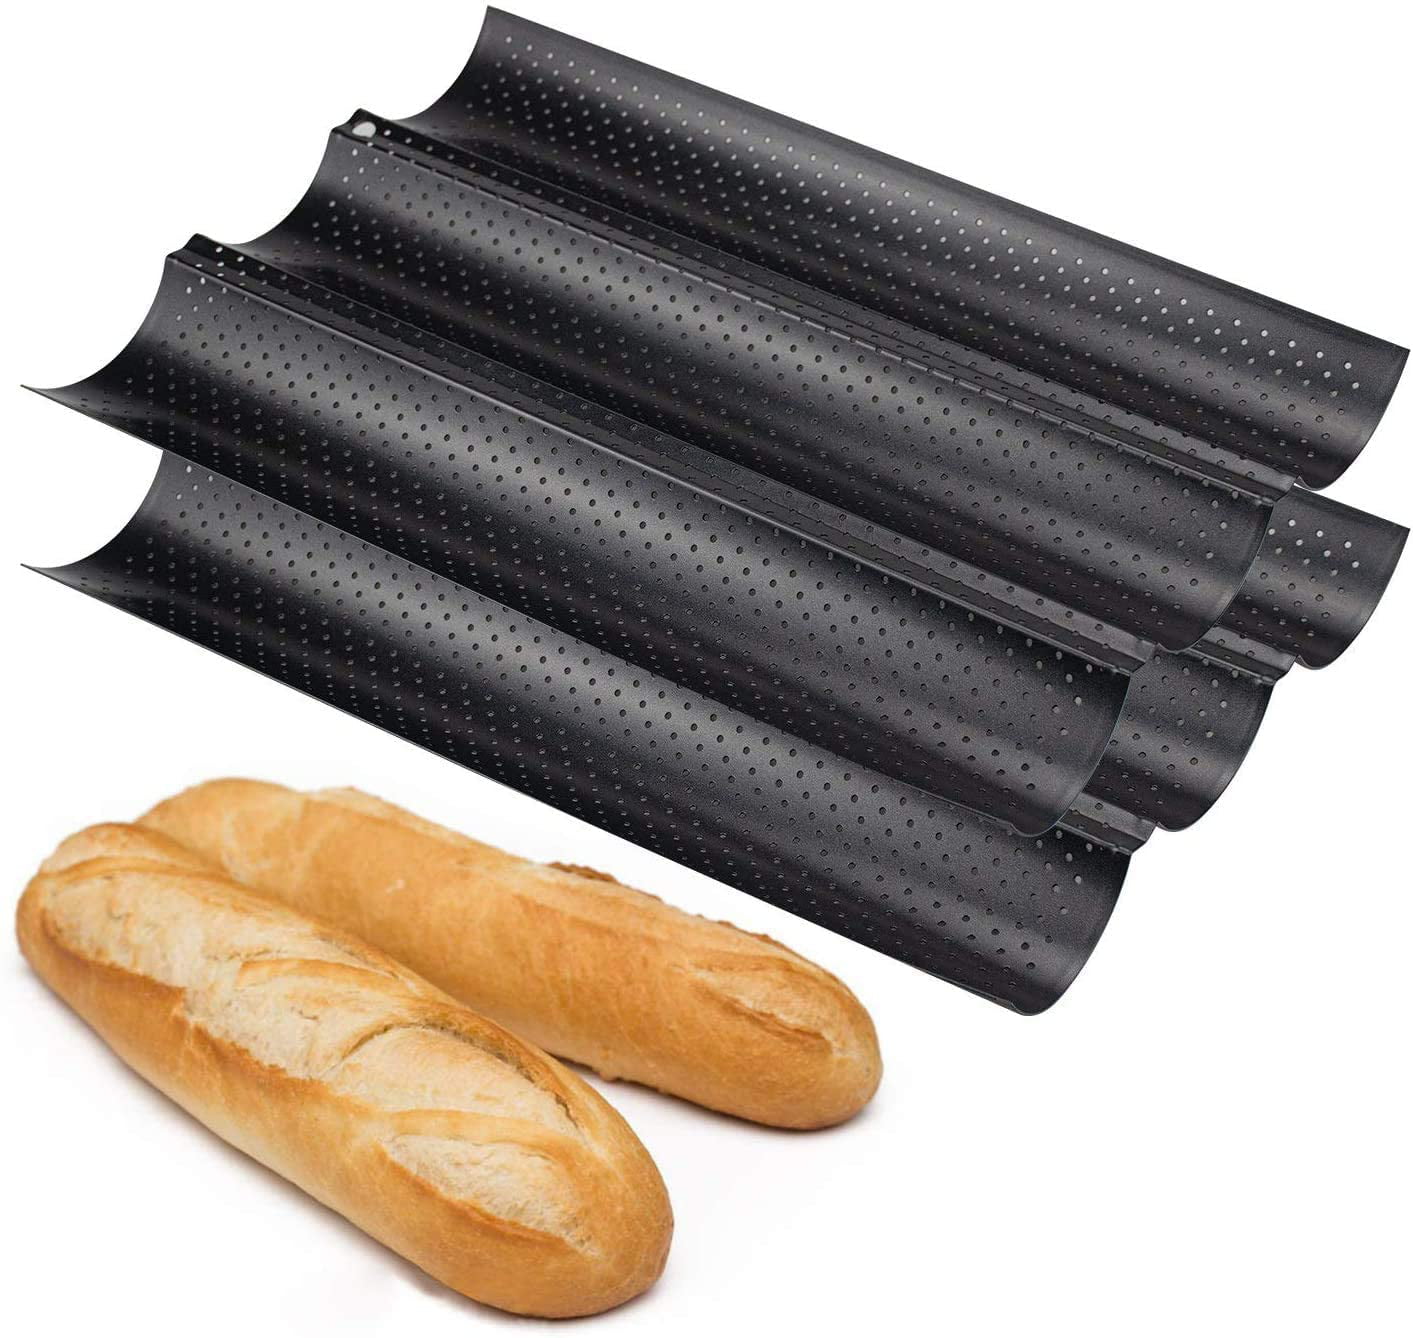 Black Perforated Baguette Pan Baguette Pans For Baking French Bread Baking 3 Wave Loaves Loaf Bake Mold Toast Cooking Bakers Molding 3 Gutter Oven Toaster Pan 